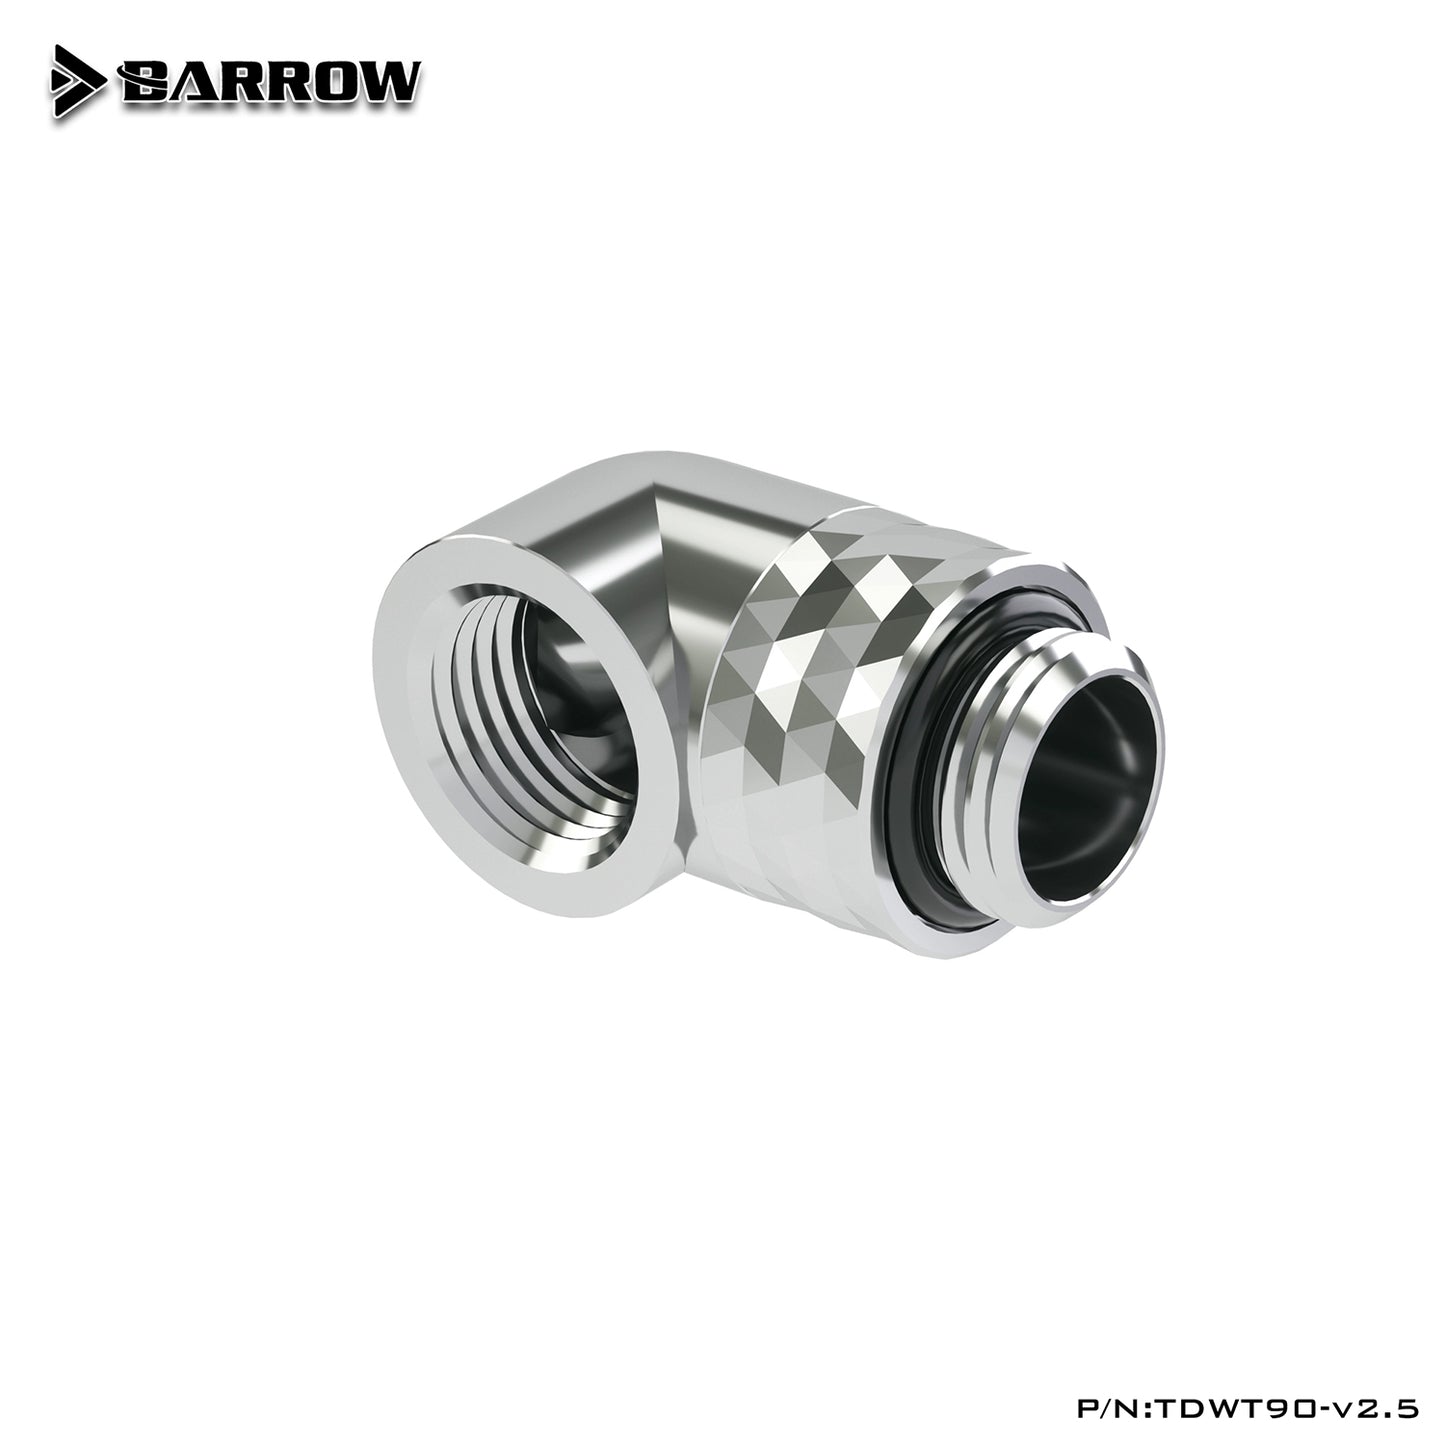 Barrow G1/4''Thread 90 Degree Male To Female Water Cooling Adaptors, Water Cooling Fitting, TDWT90-v2.5